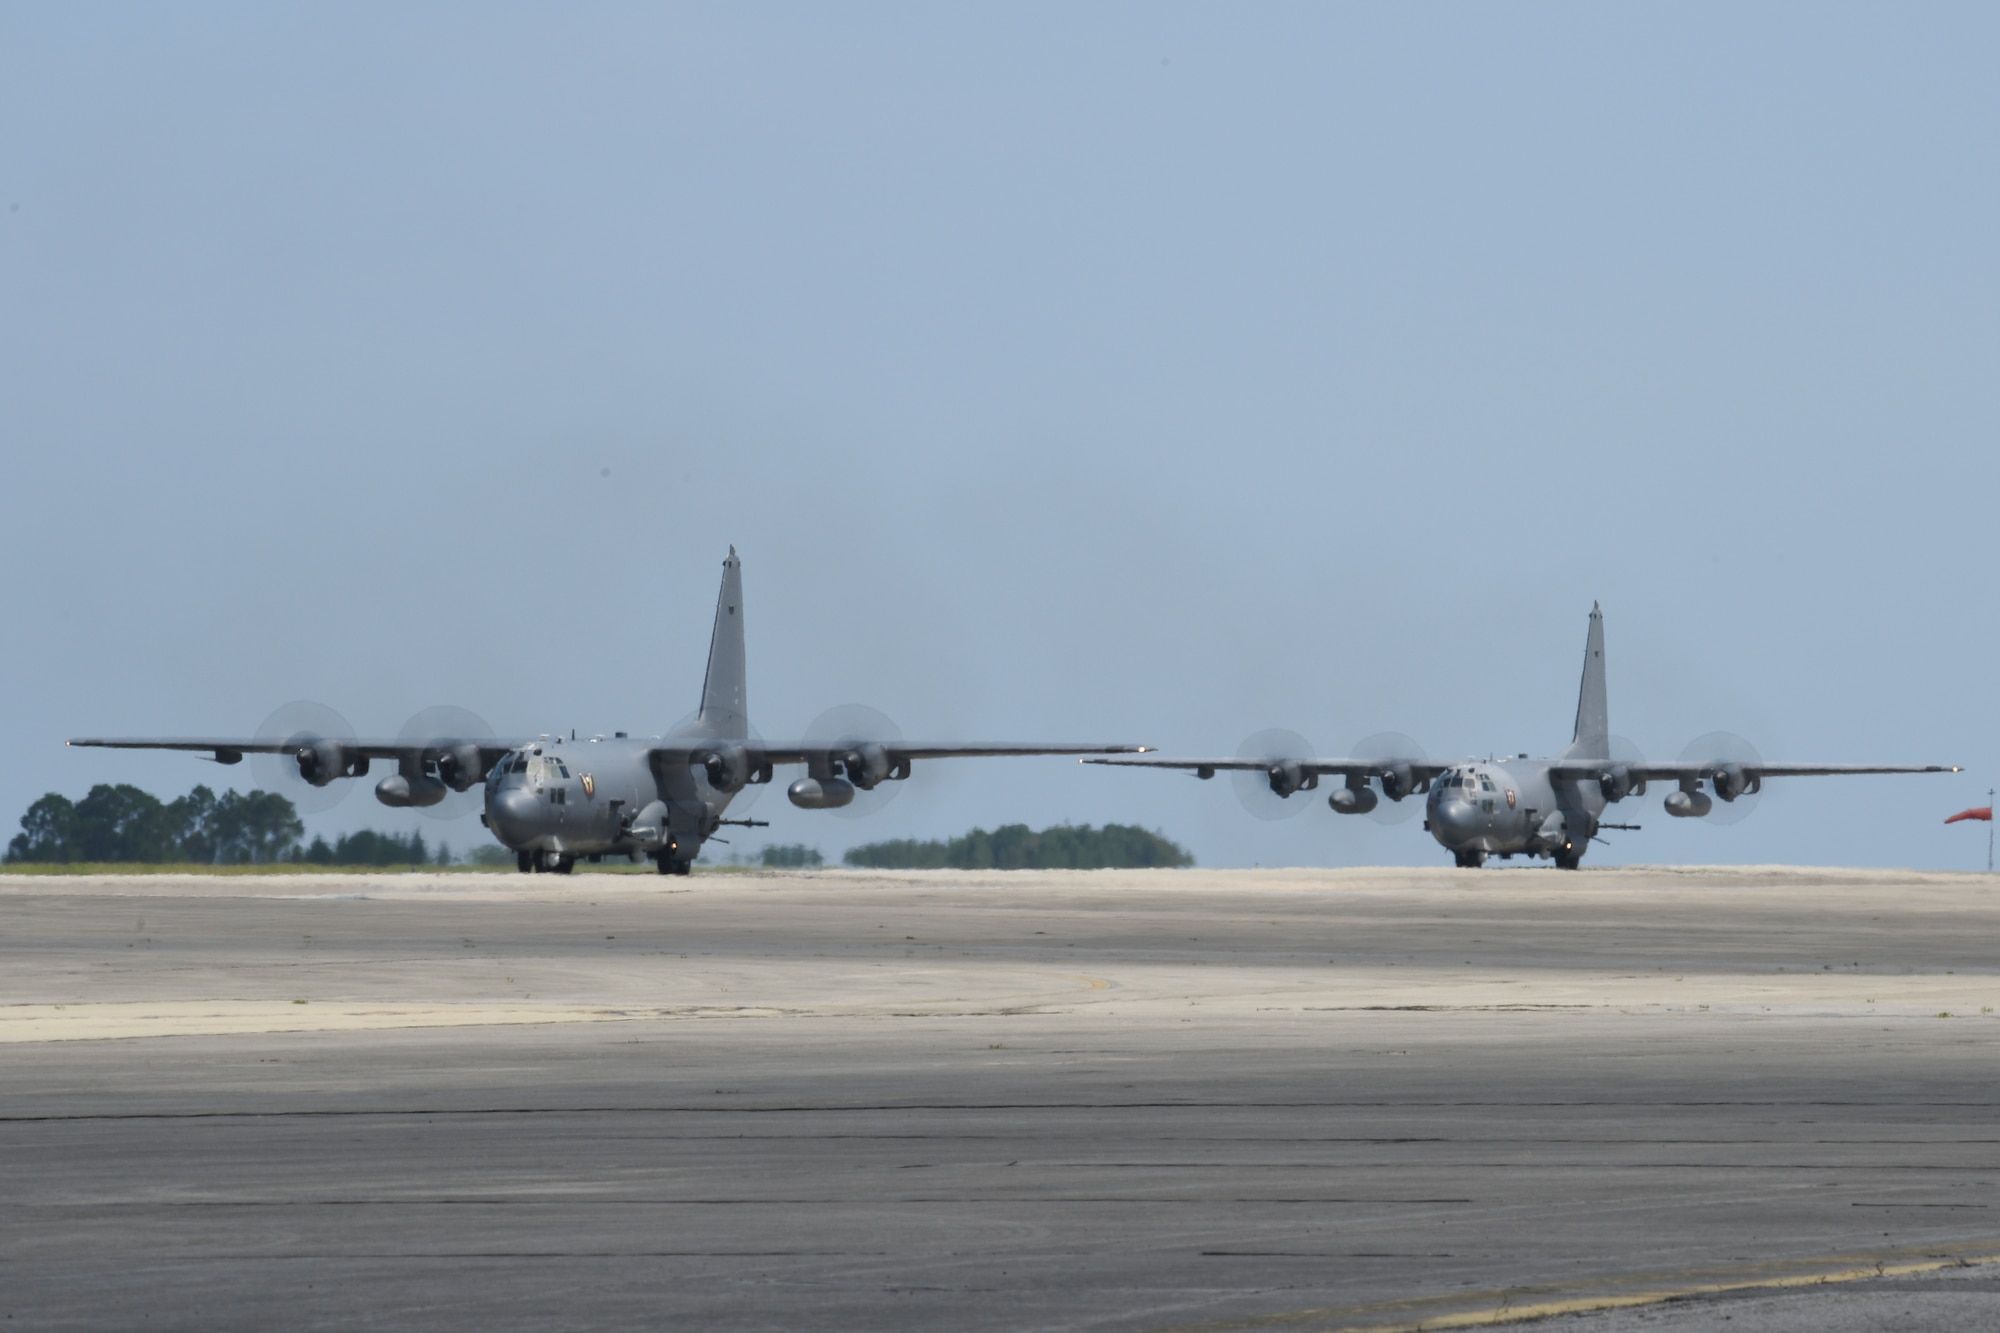 Two AC-130U “Spooky” gunships with the 4th Special Operations Squadron return from their final scheduled combat deployment at Hurlburt Field, Fla., June 8, 2019. The Spooky gunships have been almost constantly deployed since 2001 and are being replaced by the AC-130J Ghostrider, the most lethal and innovative gunship in the world. (U.S. Air Force photo by Airman 1st Class Blake Wiles)